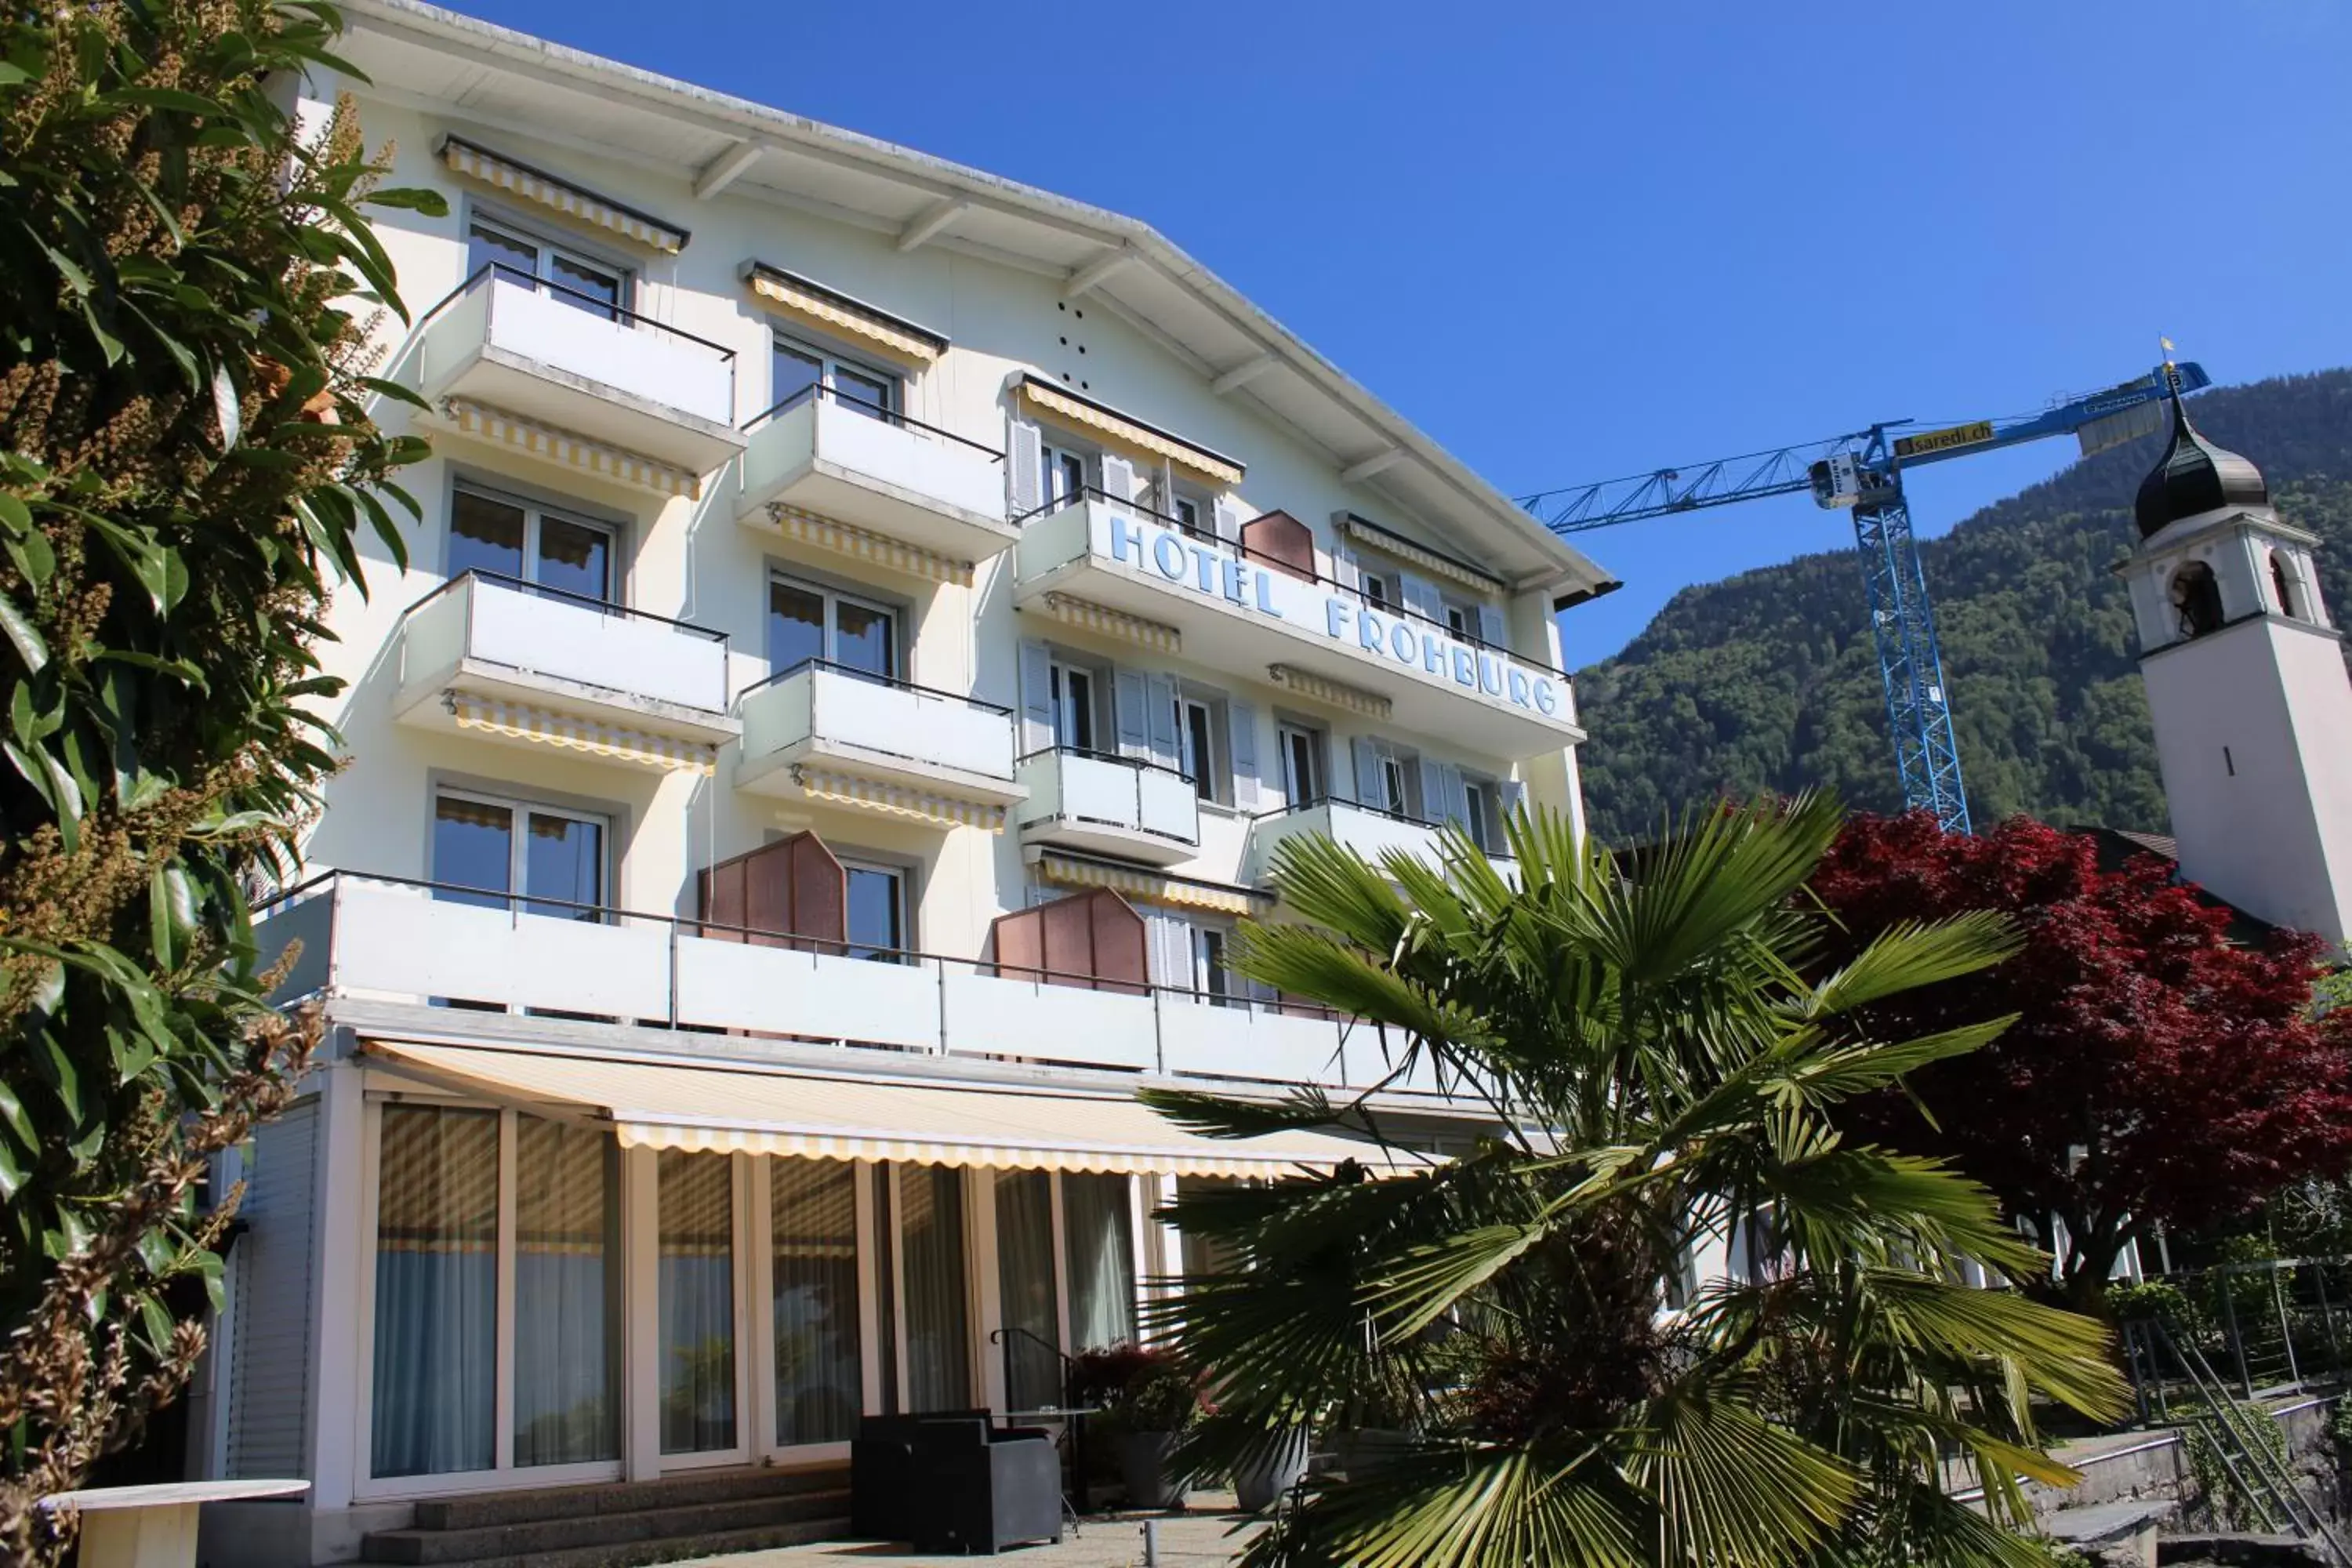 Property Building in Garni-Hotel Frohburg - Beau Rivage Collection